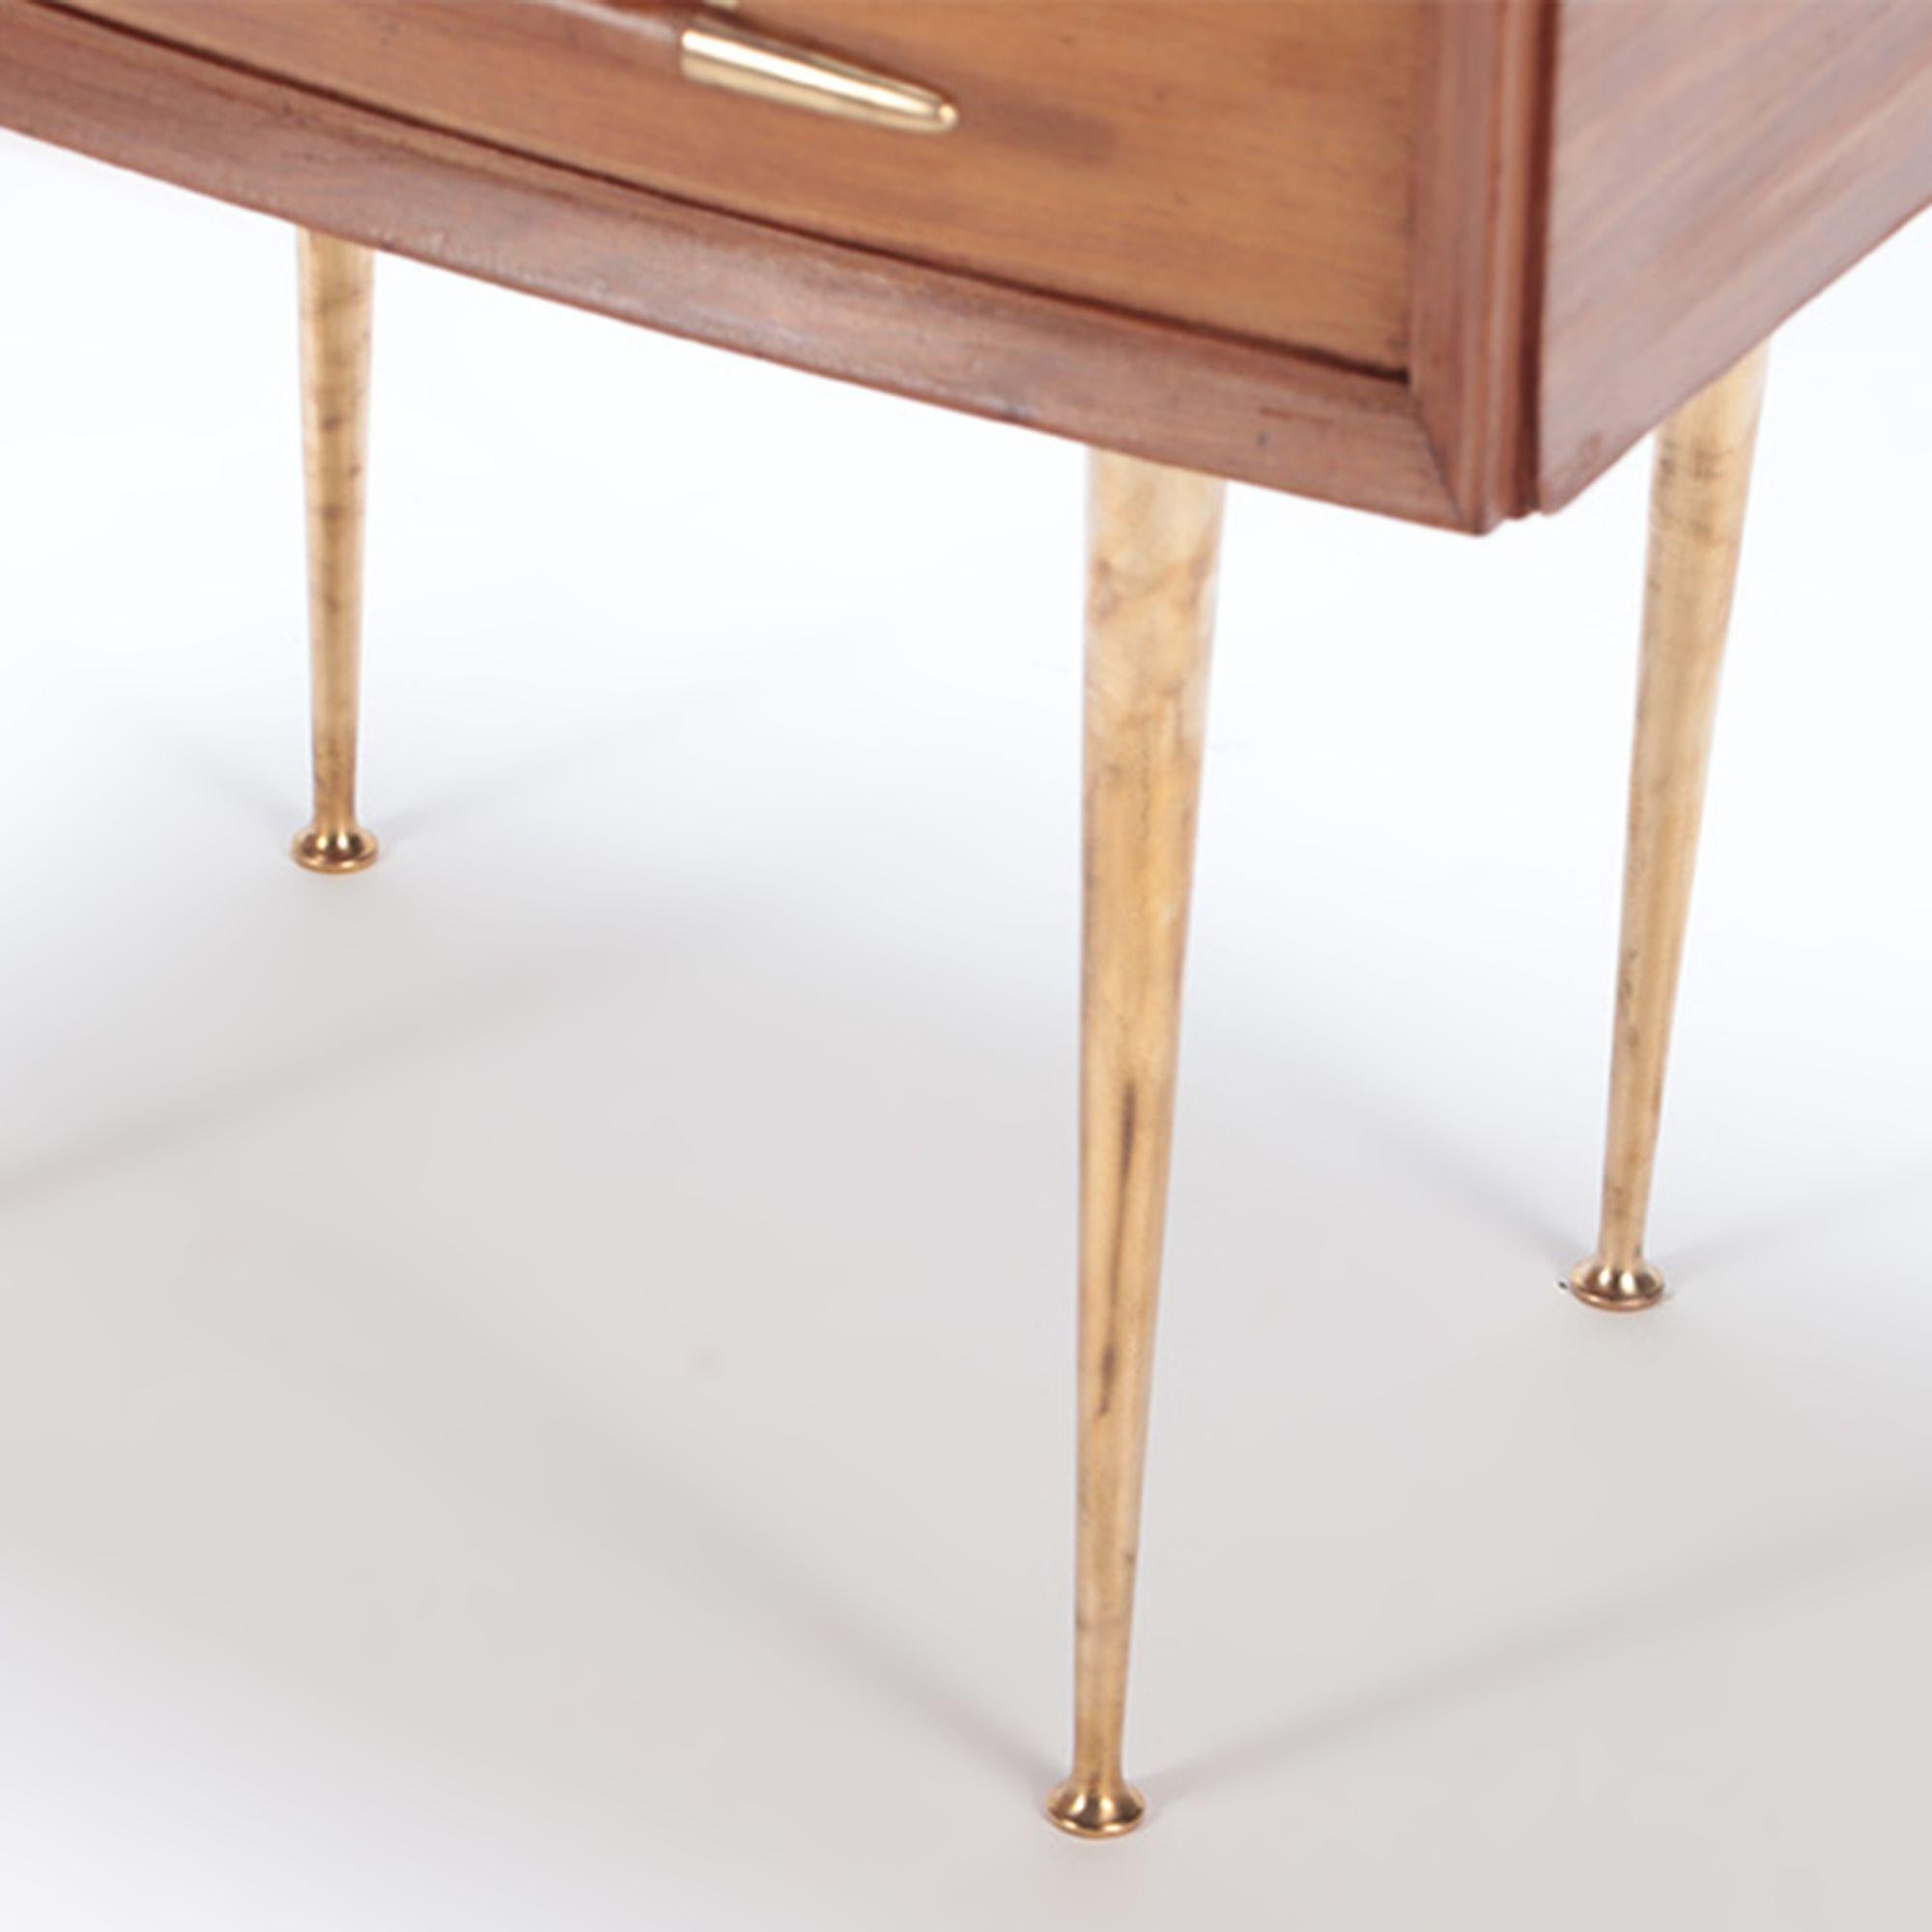 Pair of Mid-Century Modern Walnut and Brass Night Stands, circa 1955 For Sale 6